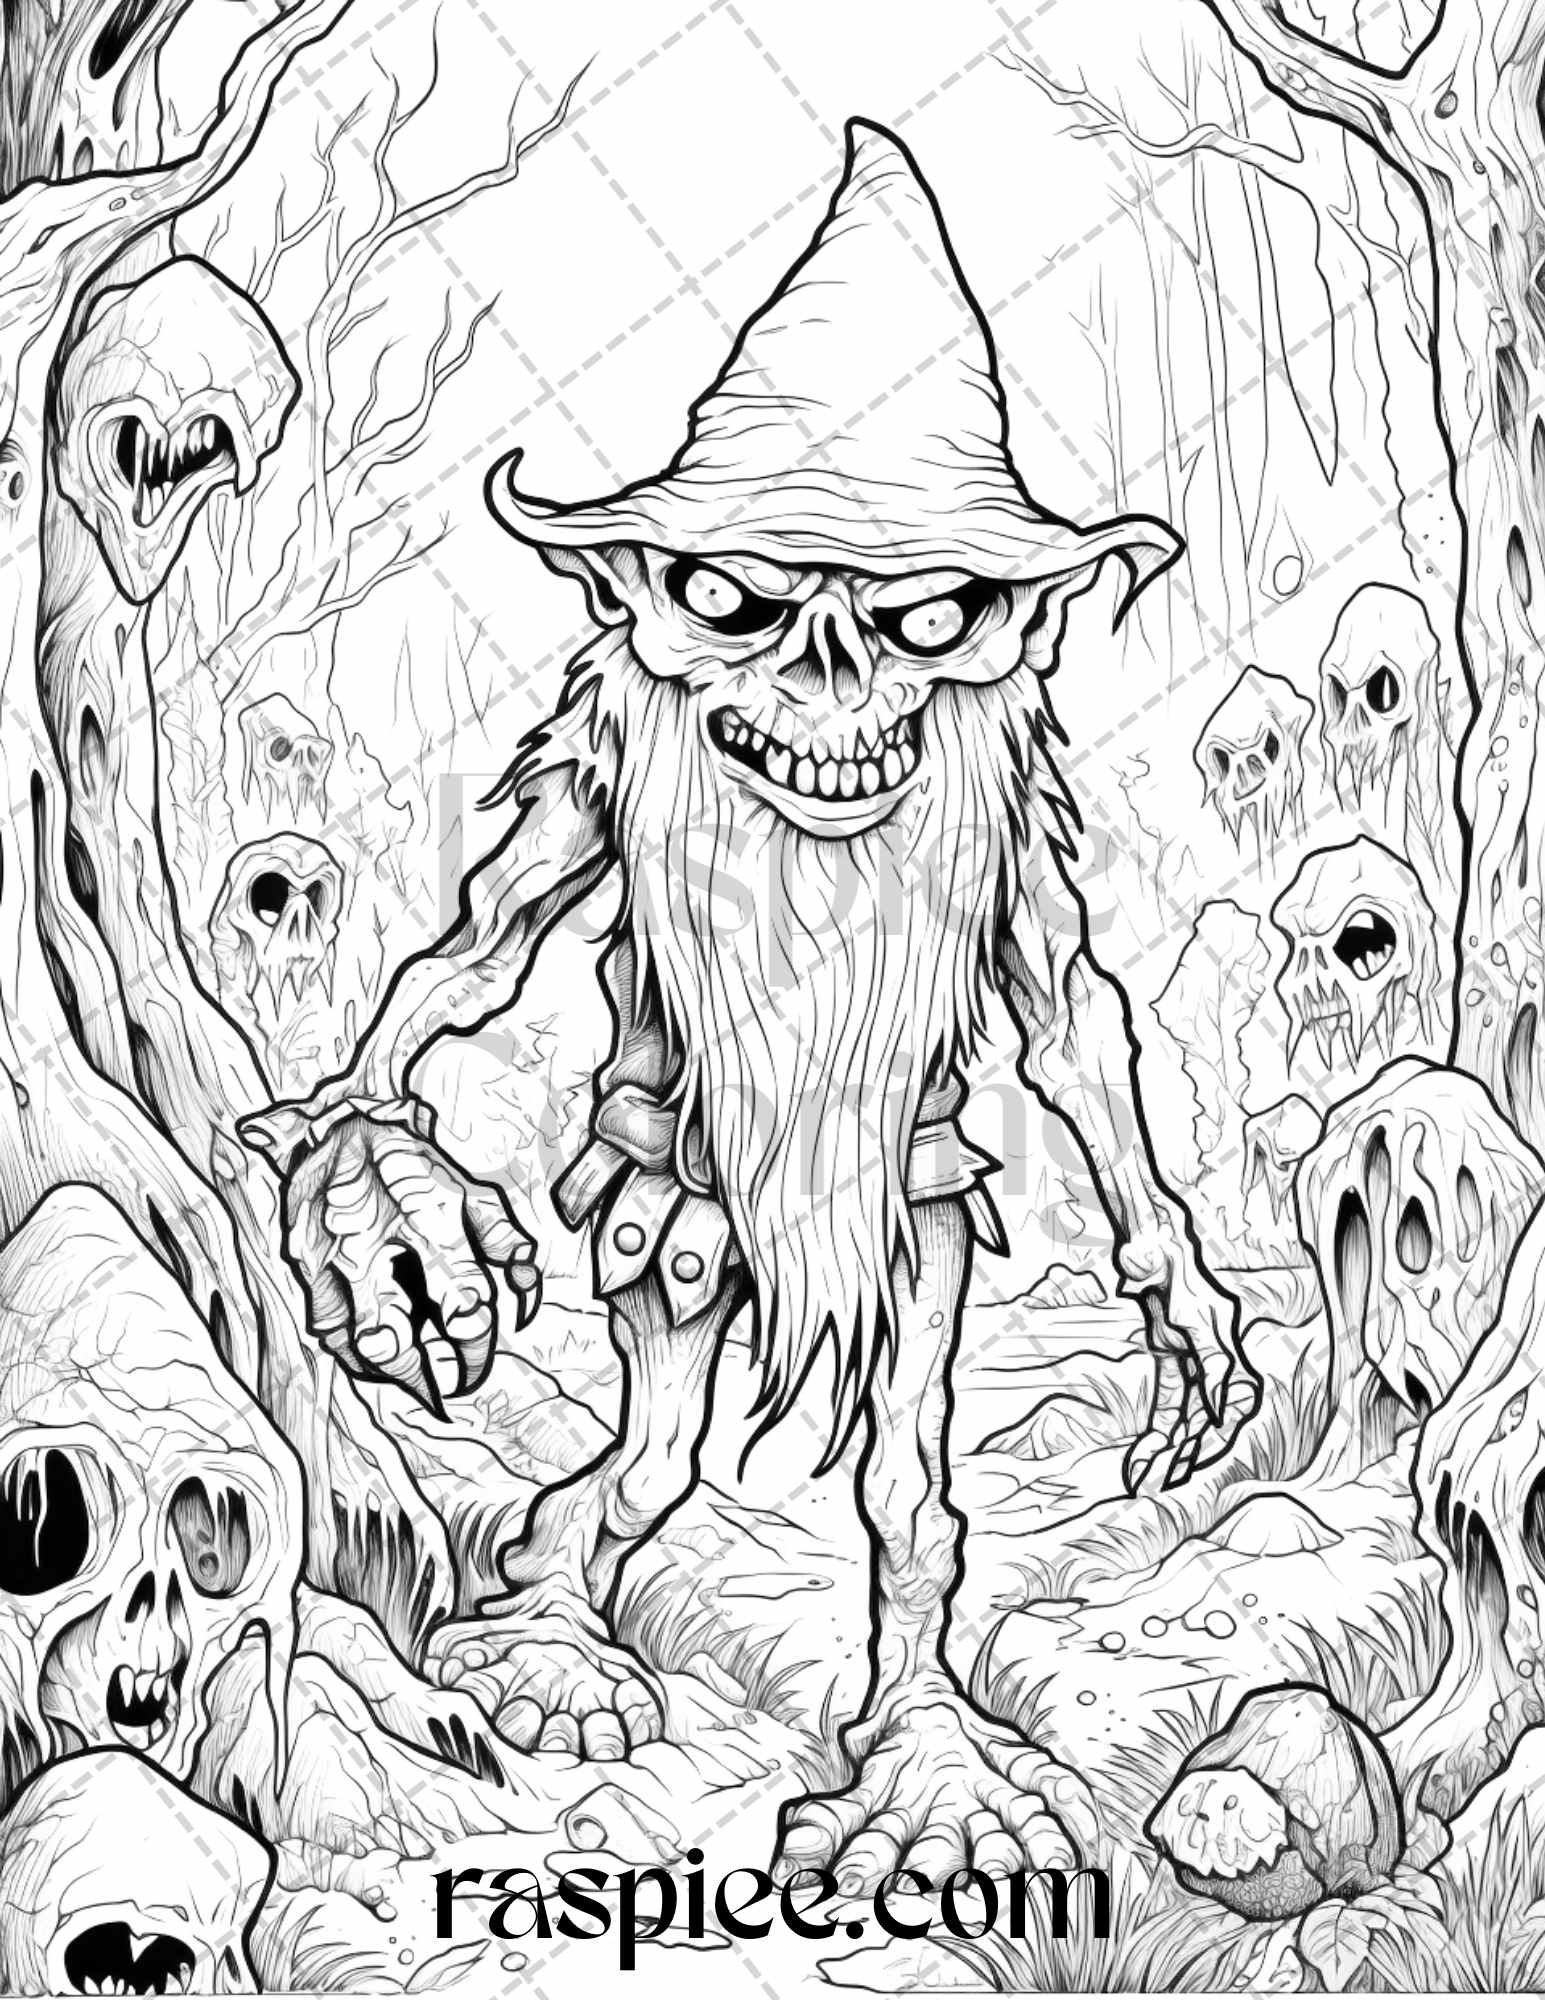 Horror Zombie Gnomes Grayscale Coloring Page, Printable Coloring Page for Adults, Halloween Zombie Gnome Coloring, Creepy Grayscale Illustration, Spooky Undead Creatures Coloring